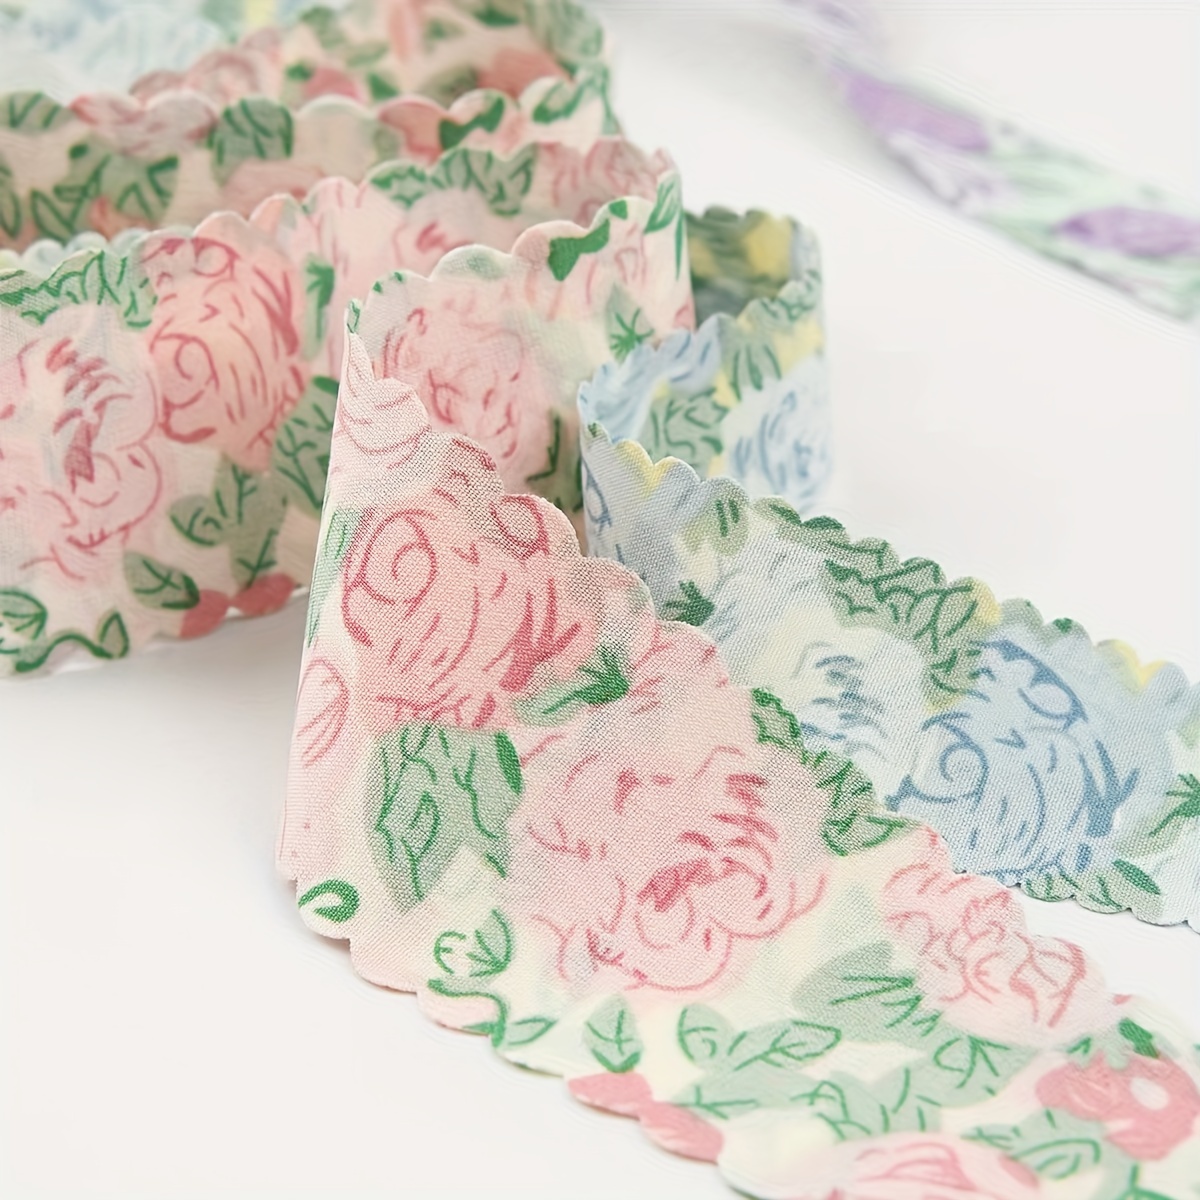 Blush Pink Ribbon 1 Inch x 25 Yards, Satin Fabric Silk Ribbon for Gift  Wrapping, Hair Bows Making, Floral Bouquets, Wreaths, DIY Sewing Projects,  Wedding, Baby Shower and Handmade Trims 